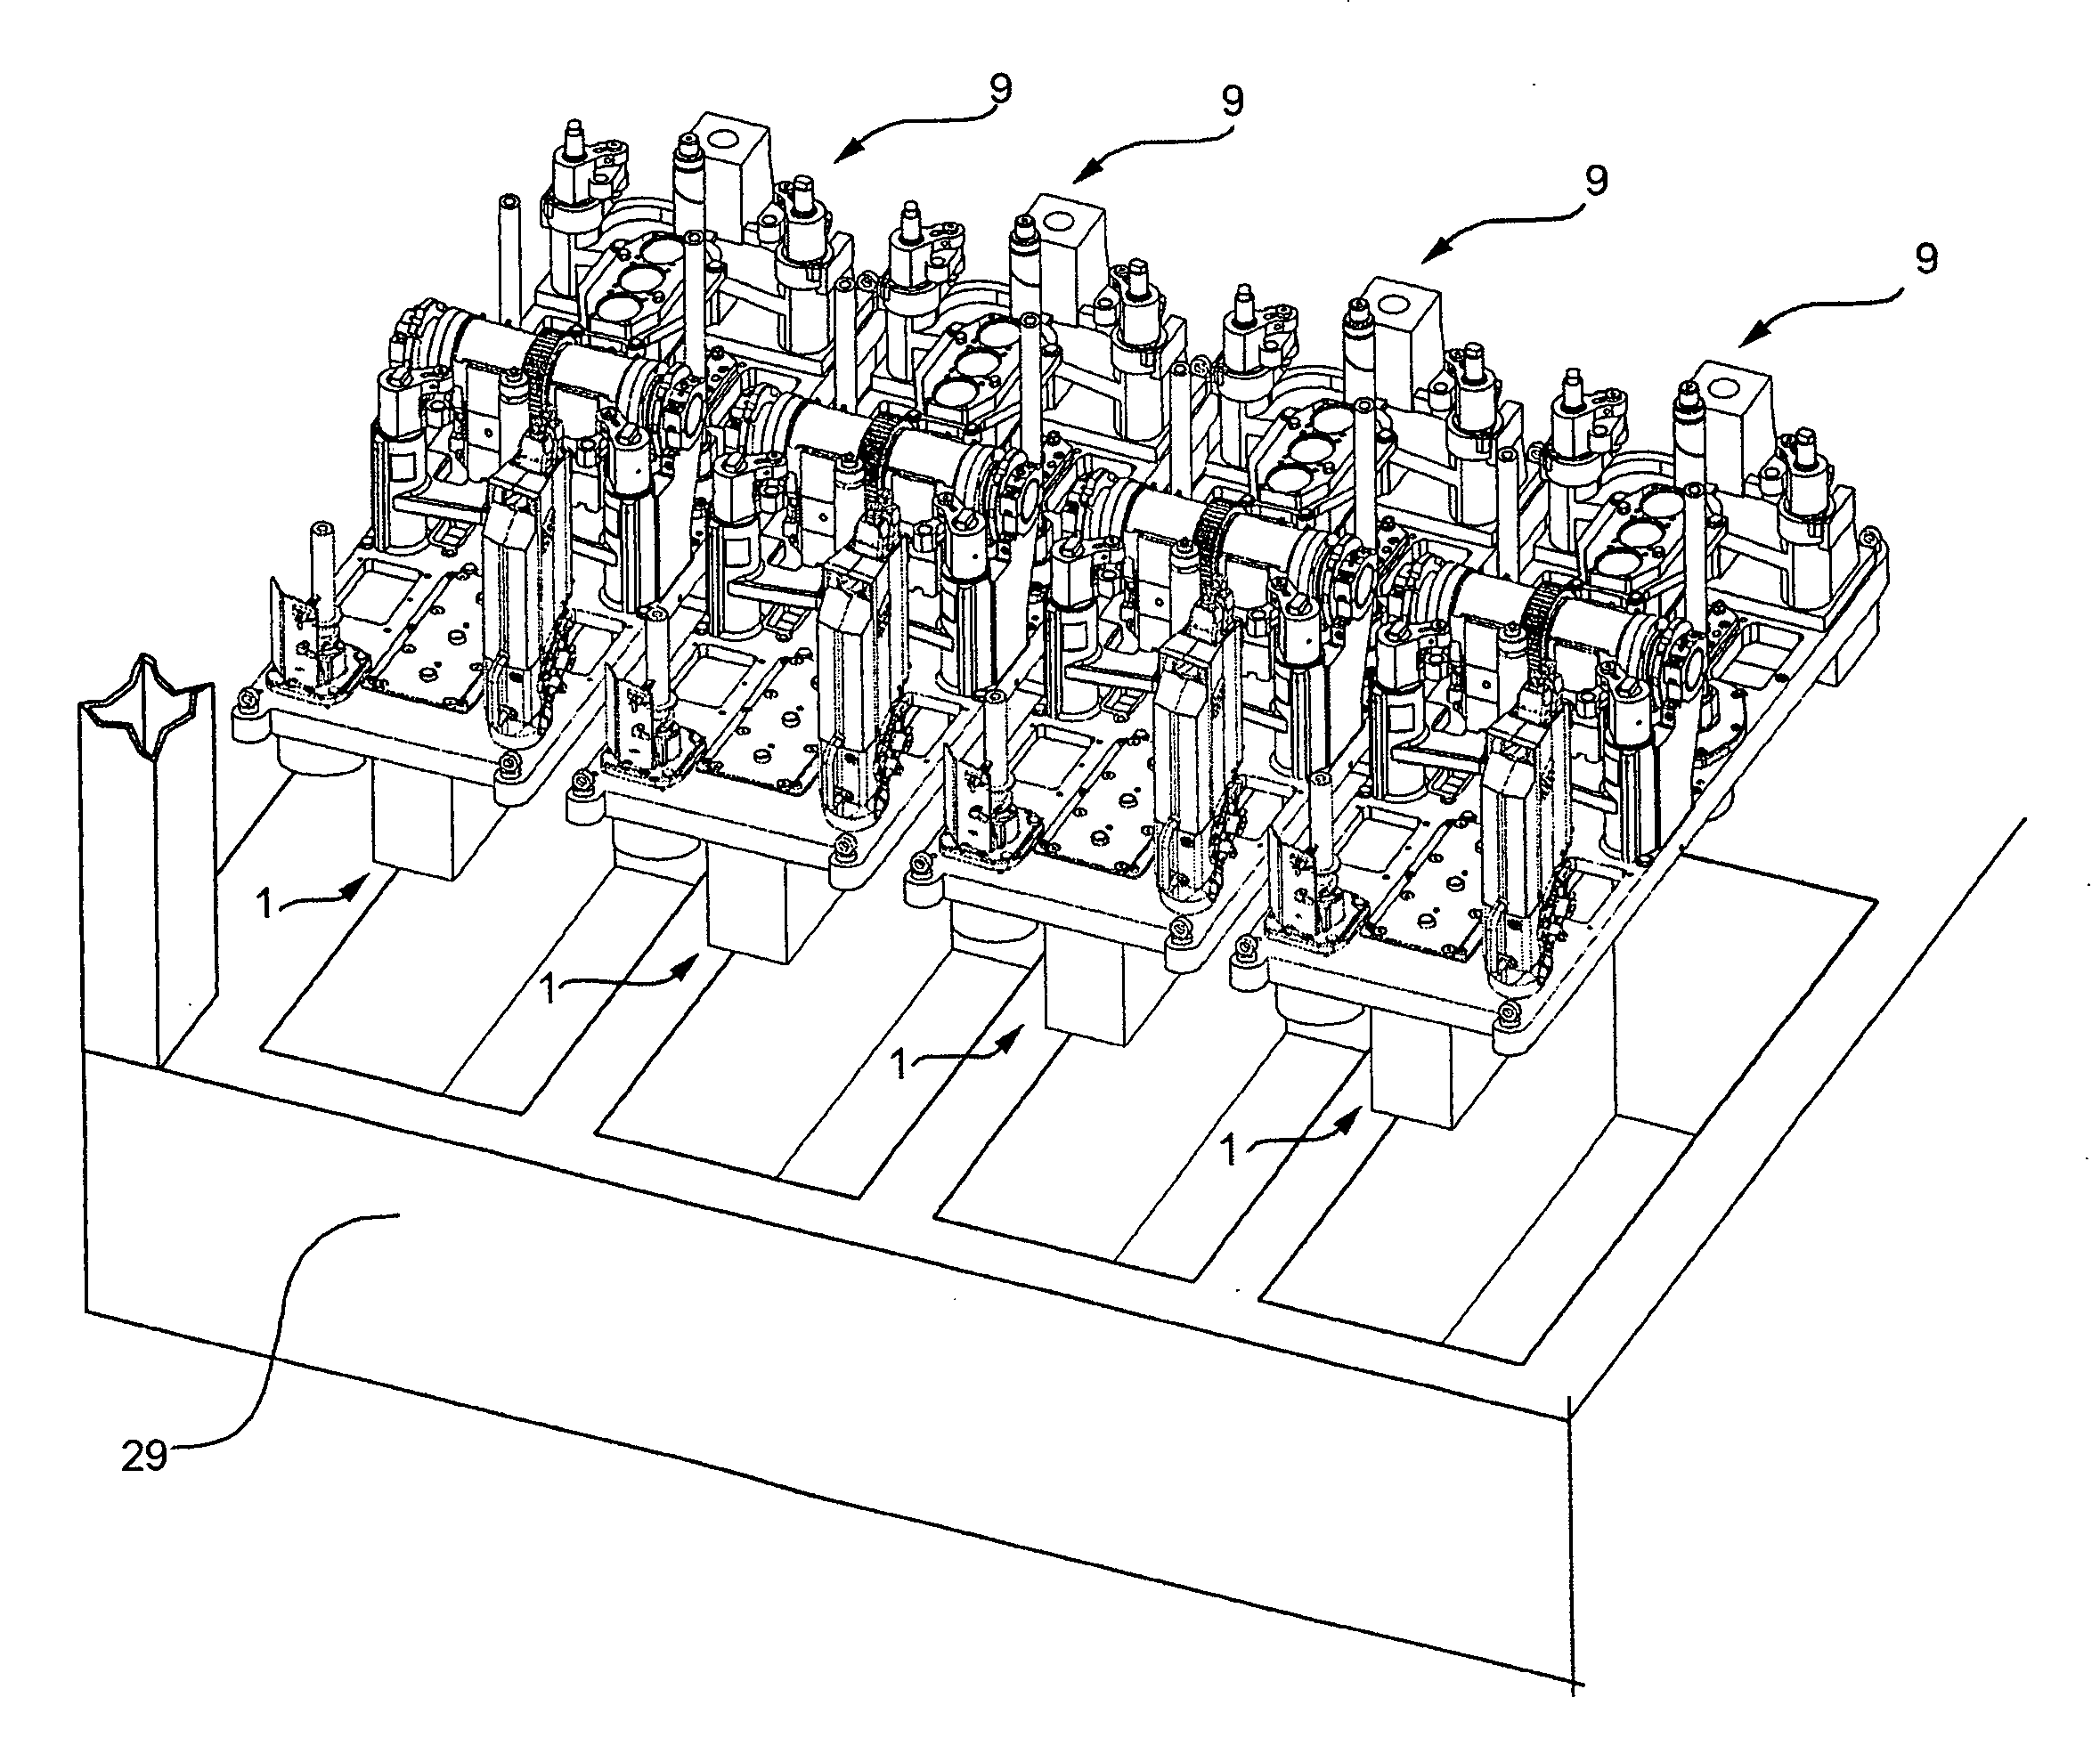 Forming section of a hollow glass items production machine and relevant support structure